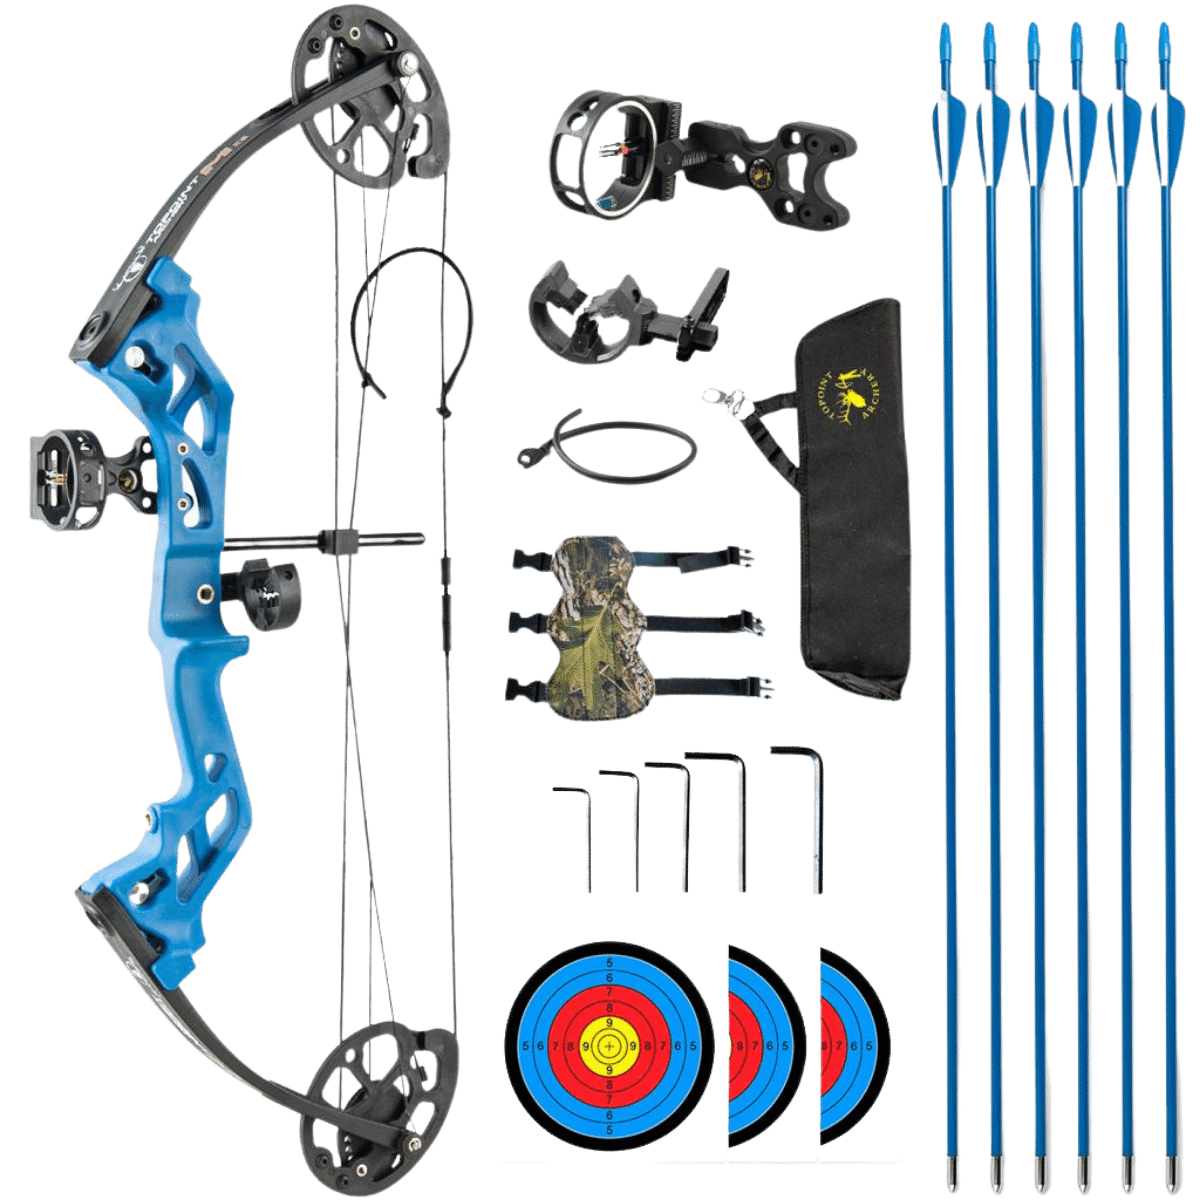 Topoint Archery Compound Bow Package M3 10-30LBS RH 17-27" 75% LET-OFF - Fast UK Shipping | Tactical Archery UK